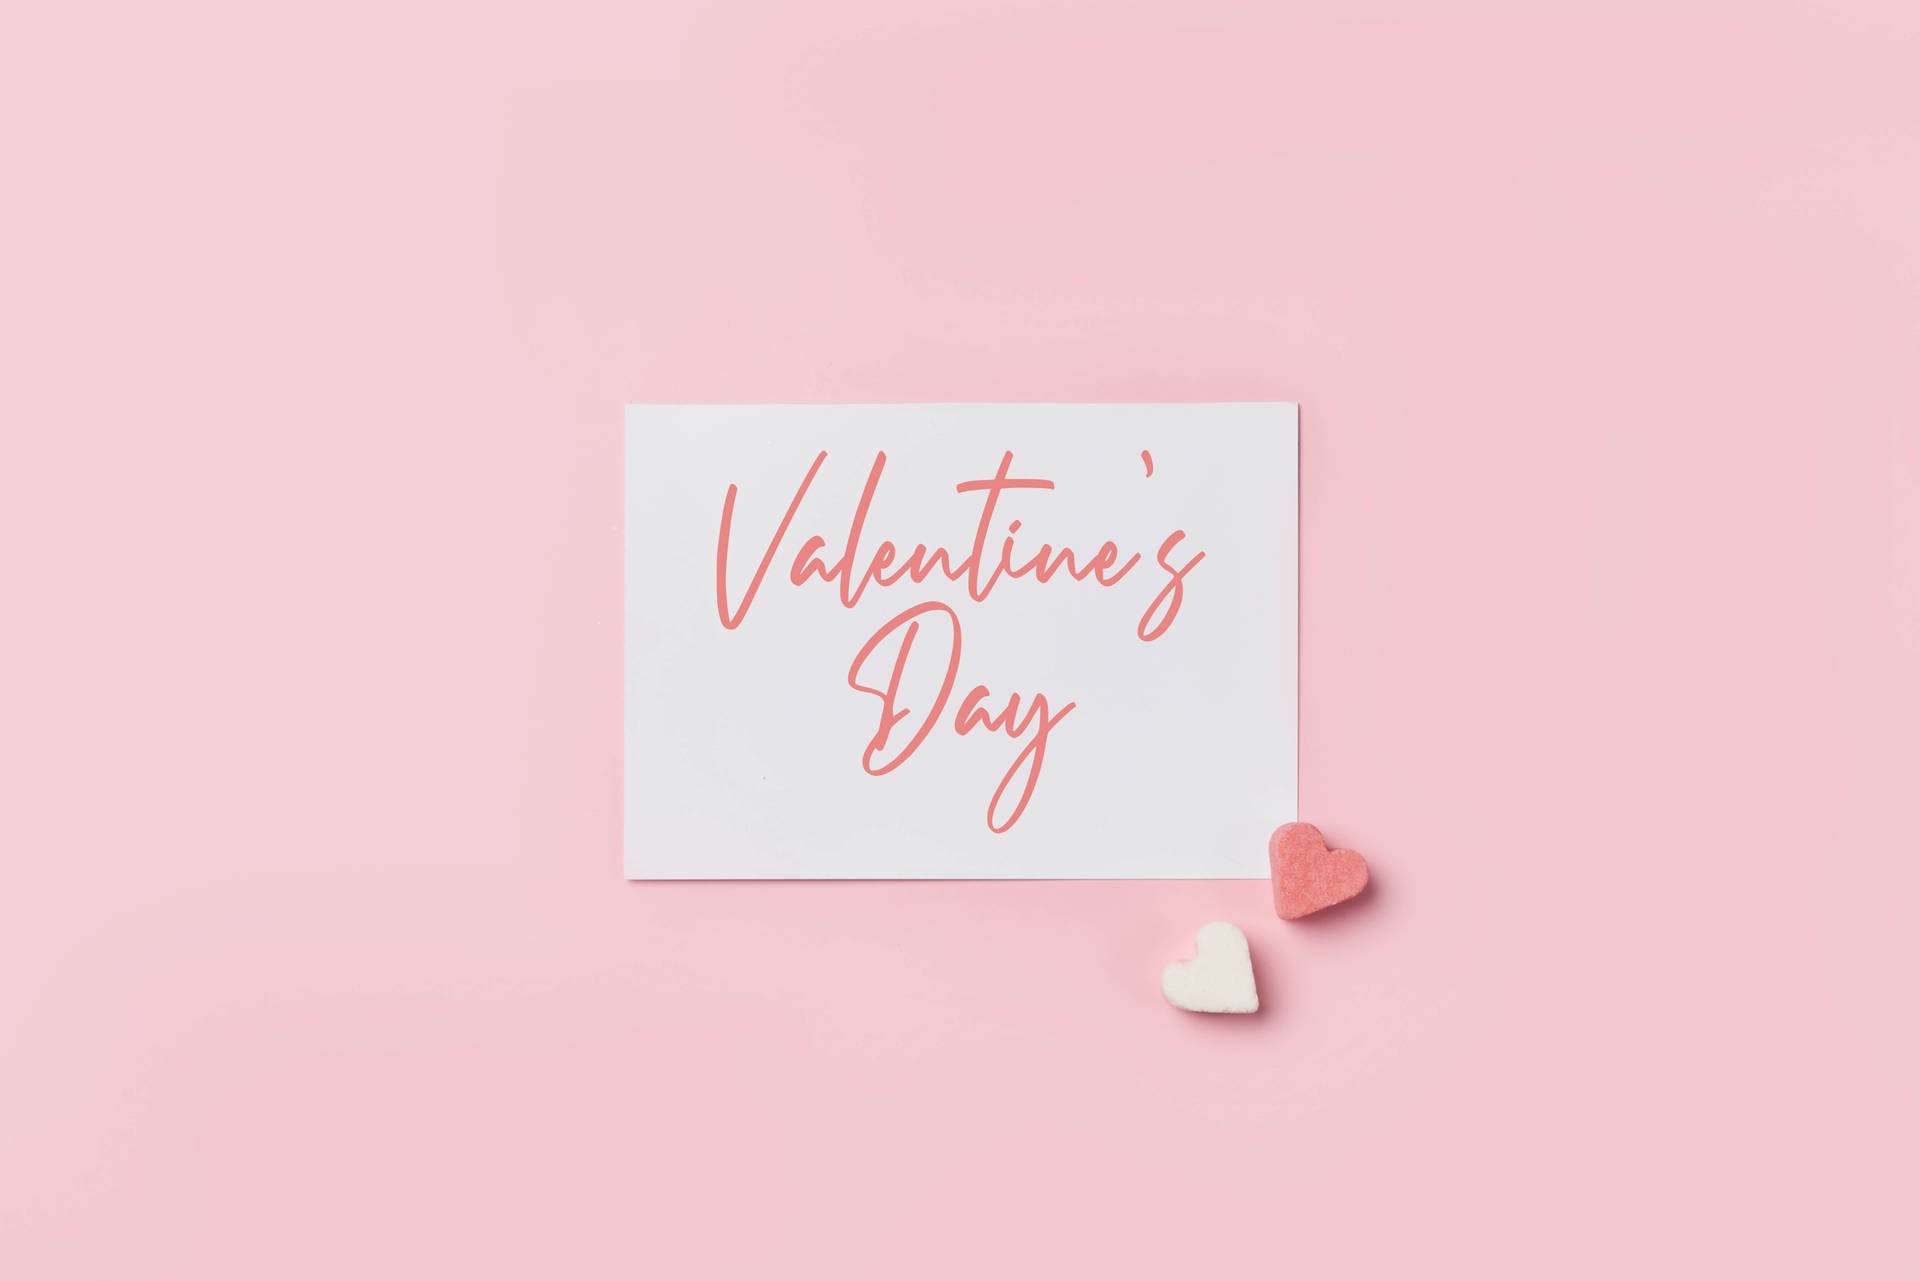 Valentines Day 6098X4068 Wallpaper and Background Image